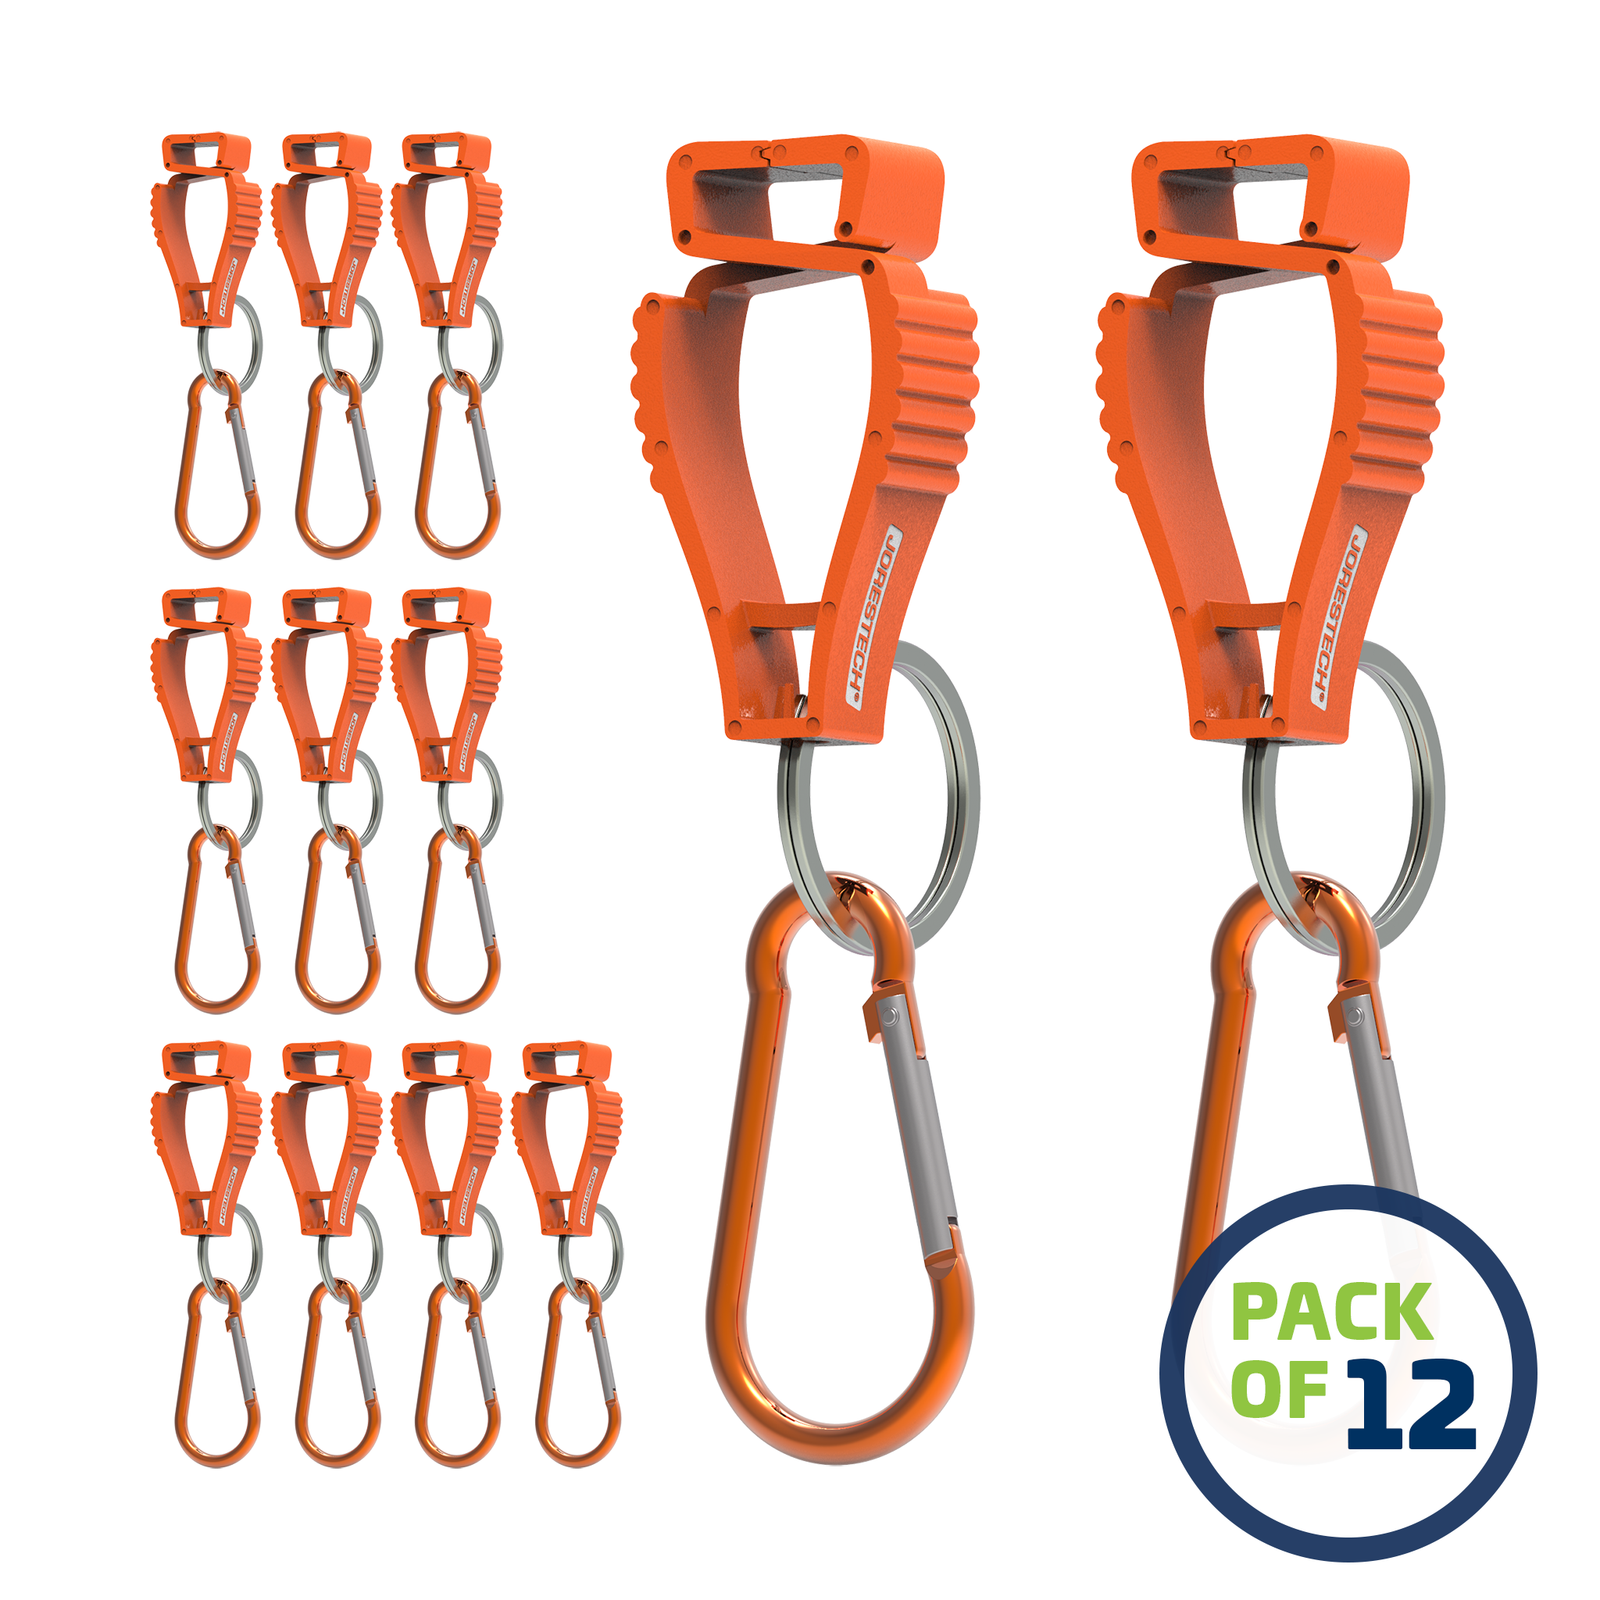 image of a pack of 12 Orange JORESTECH glove clip safety holders with carabiner over white background